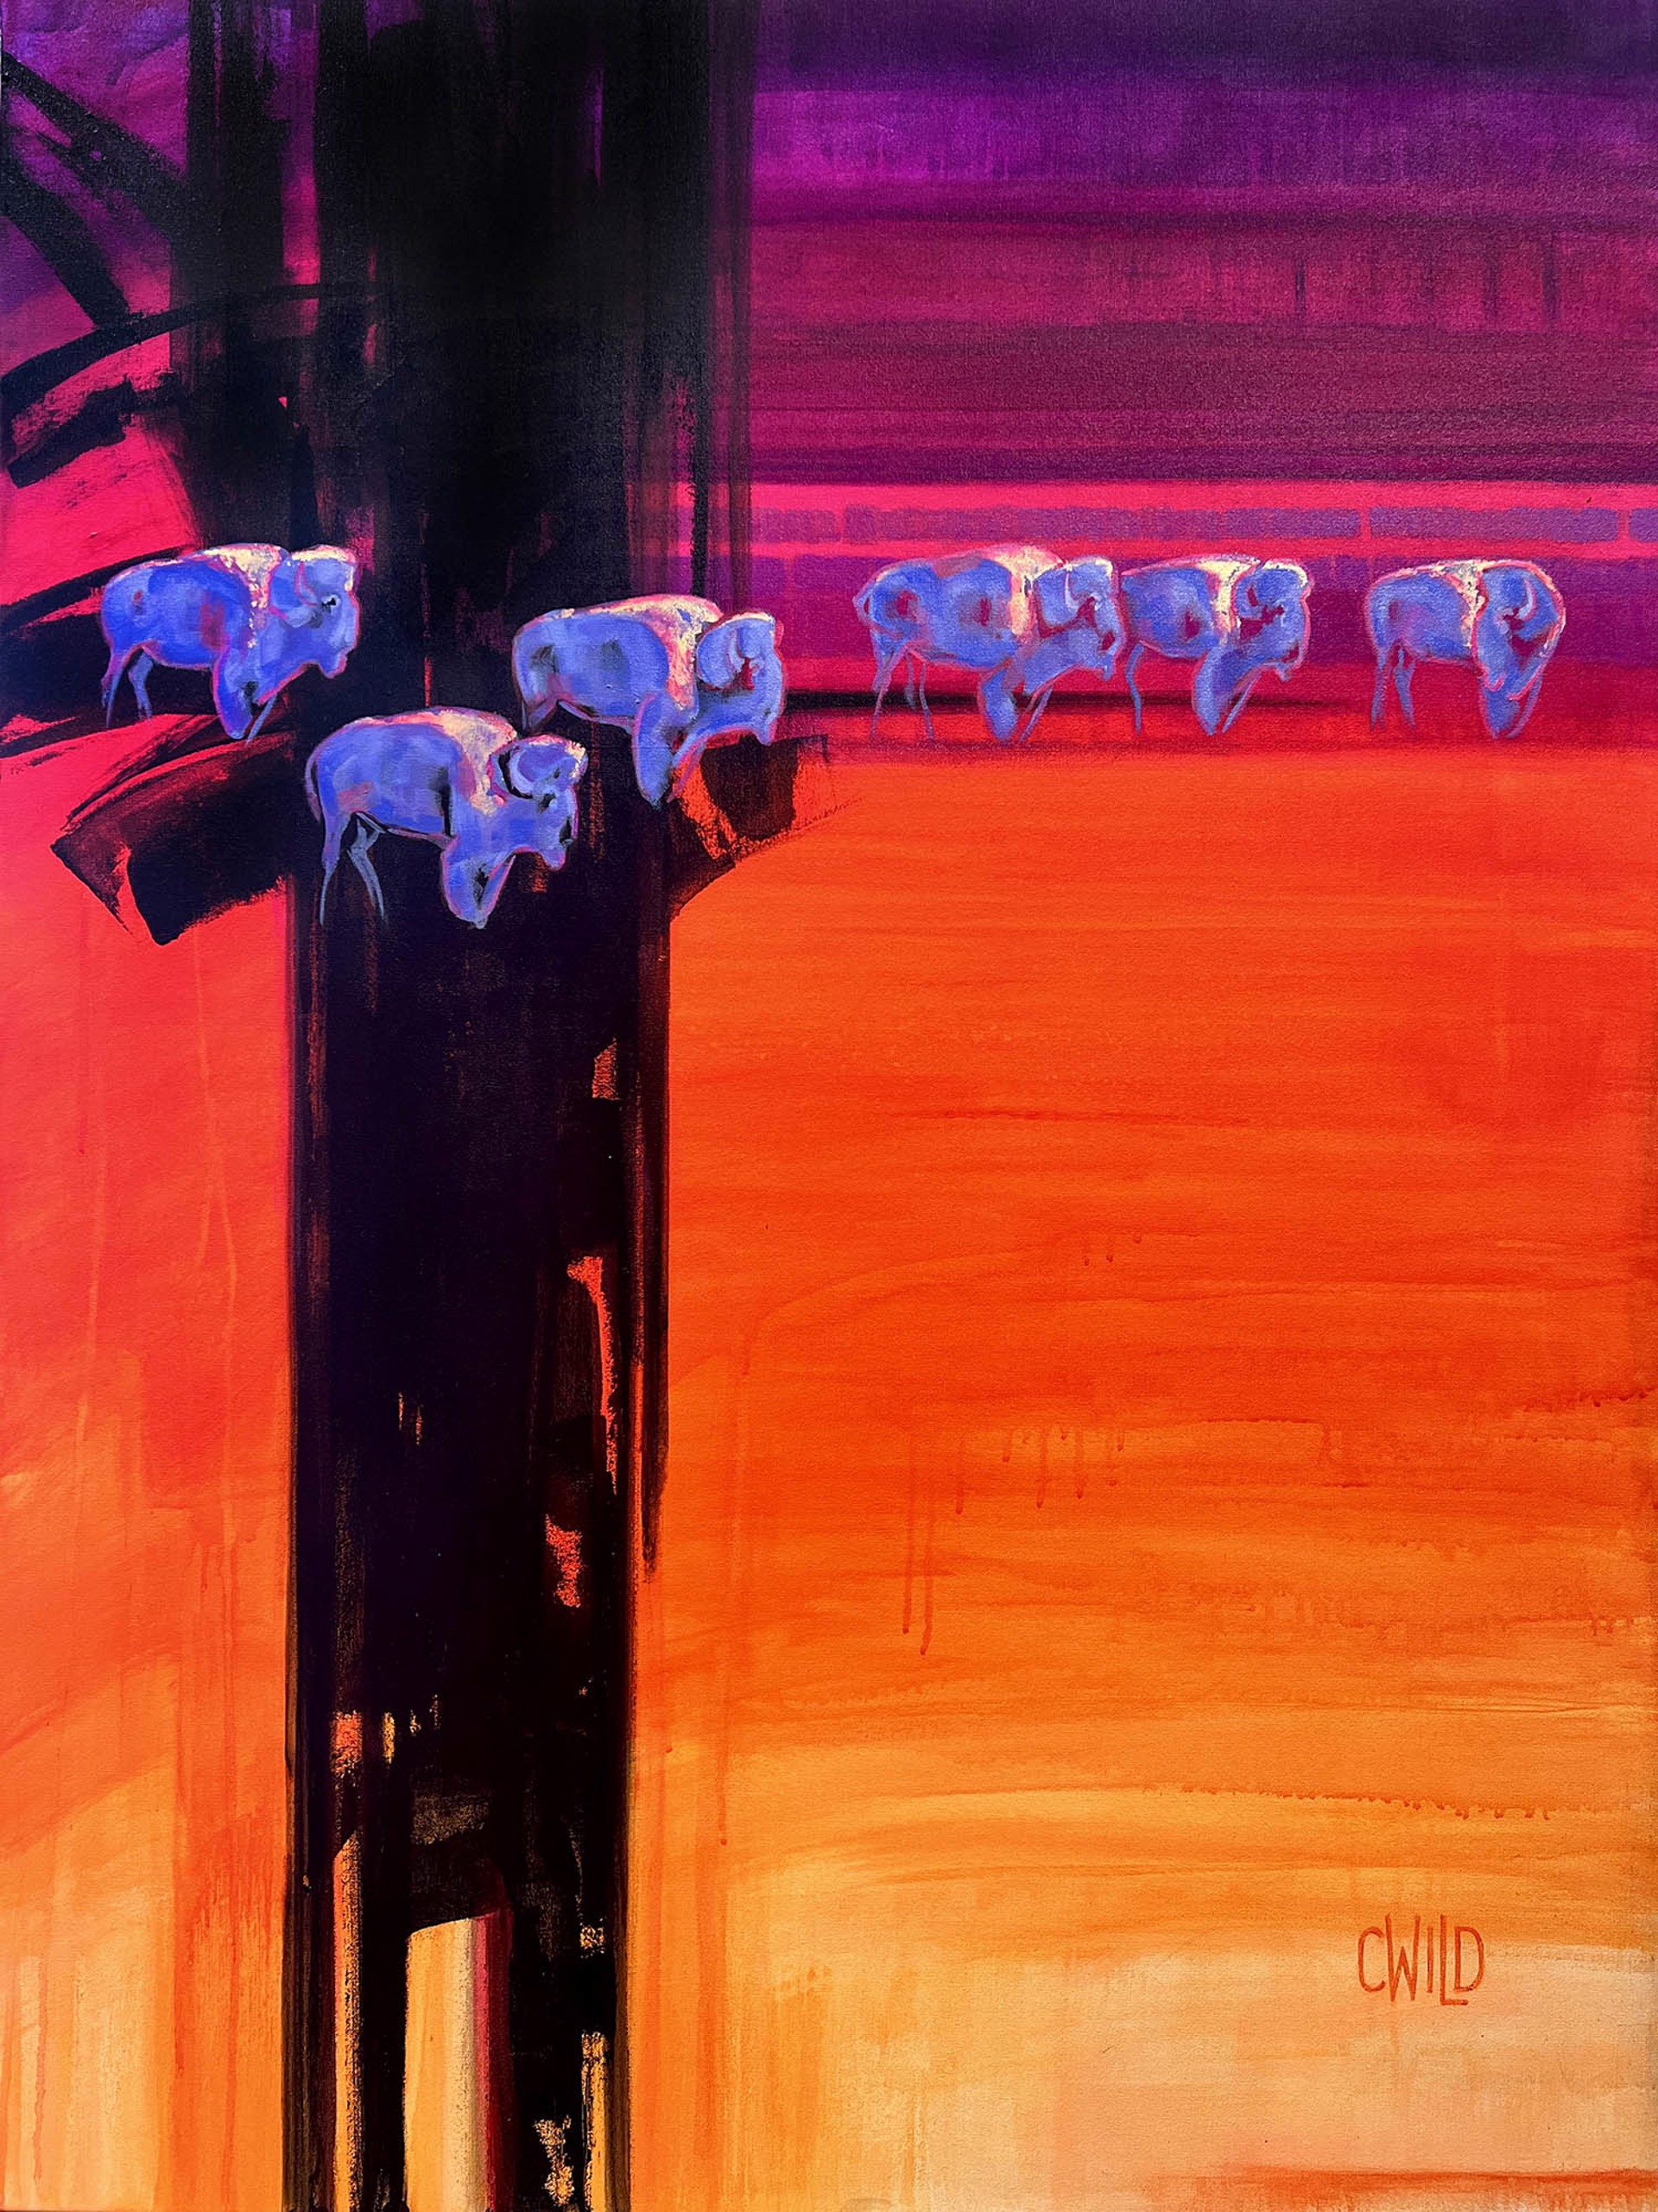 Original Painting Featuring Blue Bison Walking Across Abstracted Horizon Line With Purple To Orange Gradient And Expressive Black Brushstroke